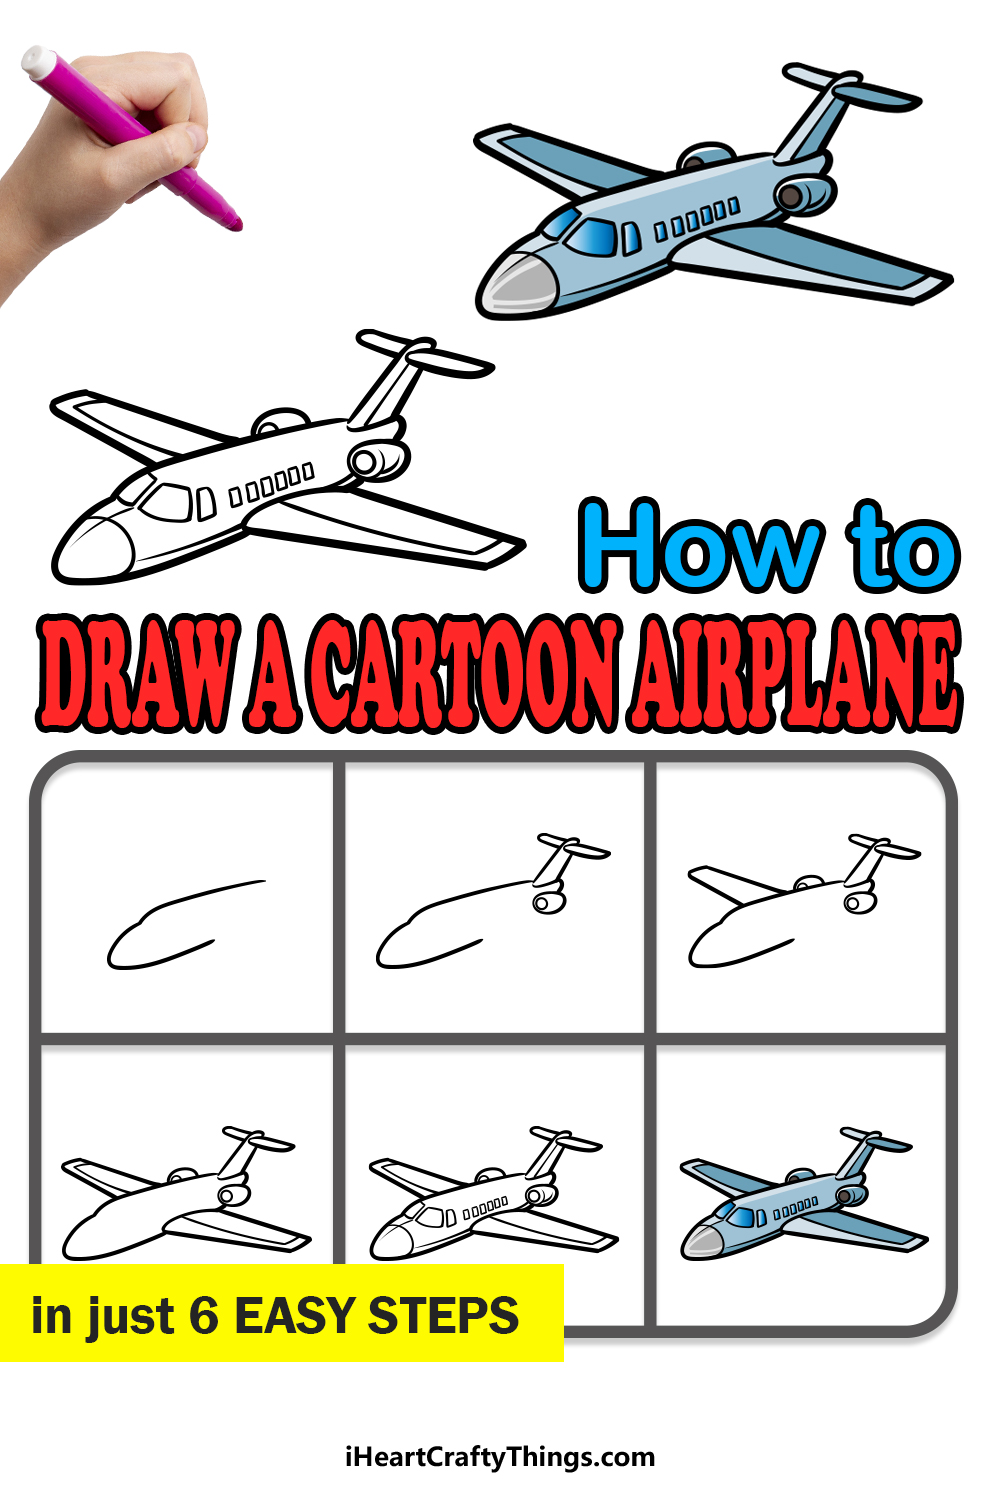 How to Draw A Cartoon Airplane in 6 easy steps